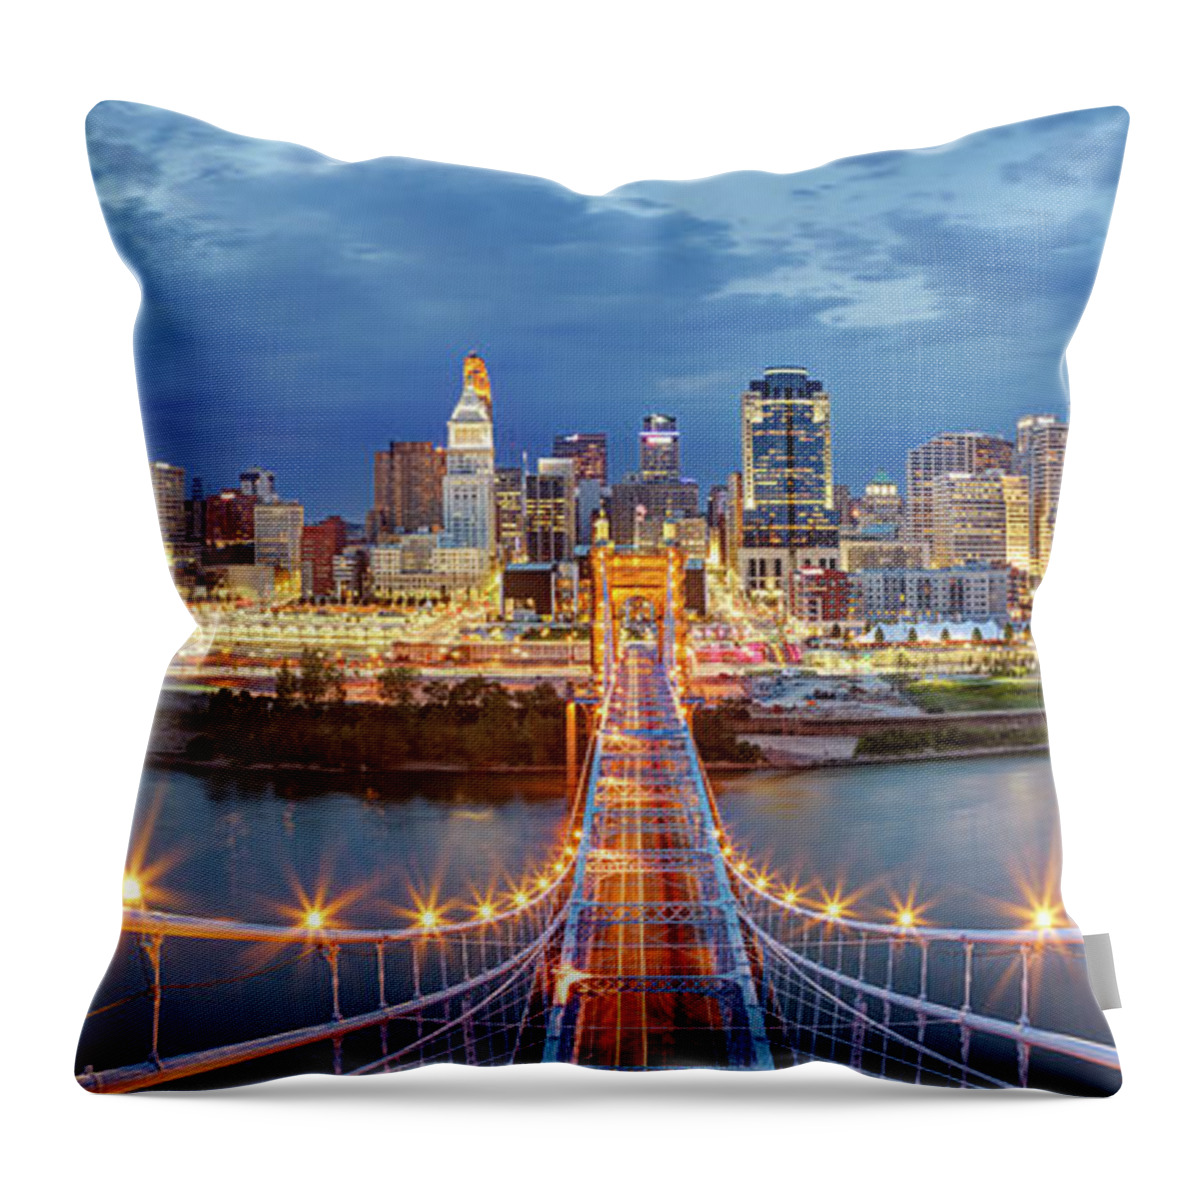 Downtown District Throw Pillow featuring the photograph View From Atop John A. Roebling Bridge by Adam Jones